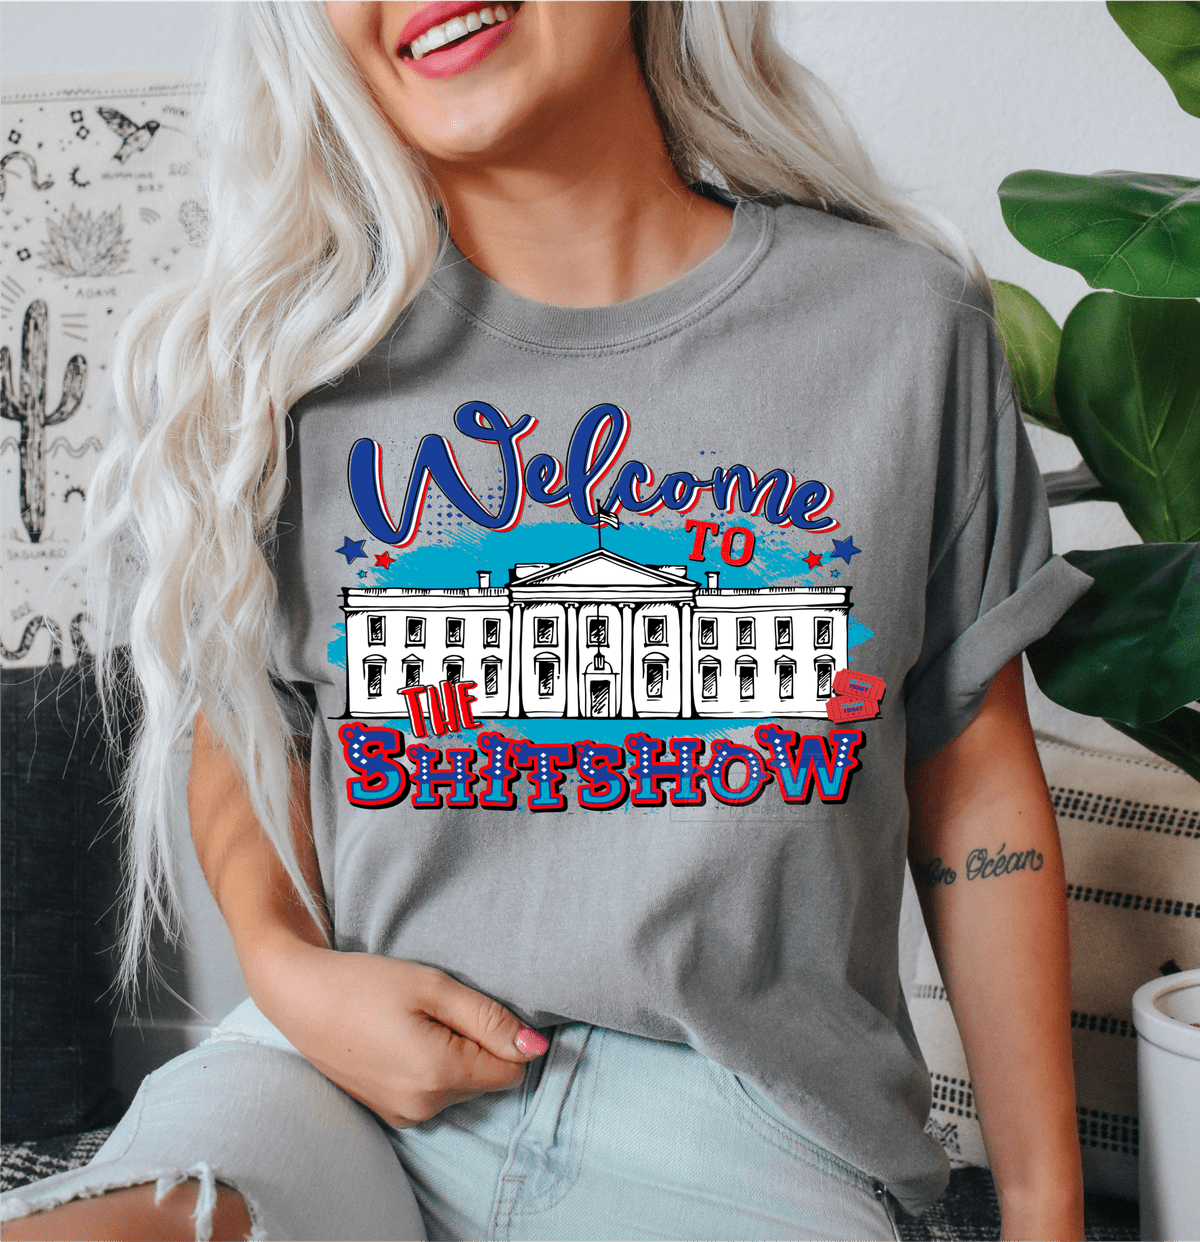 Welcome to the shitshow White House tickets size ADULT DTF TRANSFERPRINT TO ORDER - Do it yourself Transfers